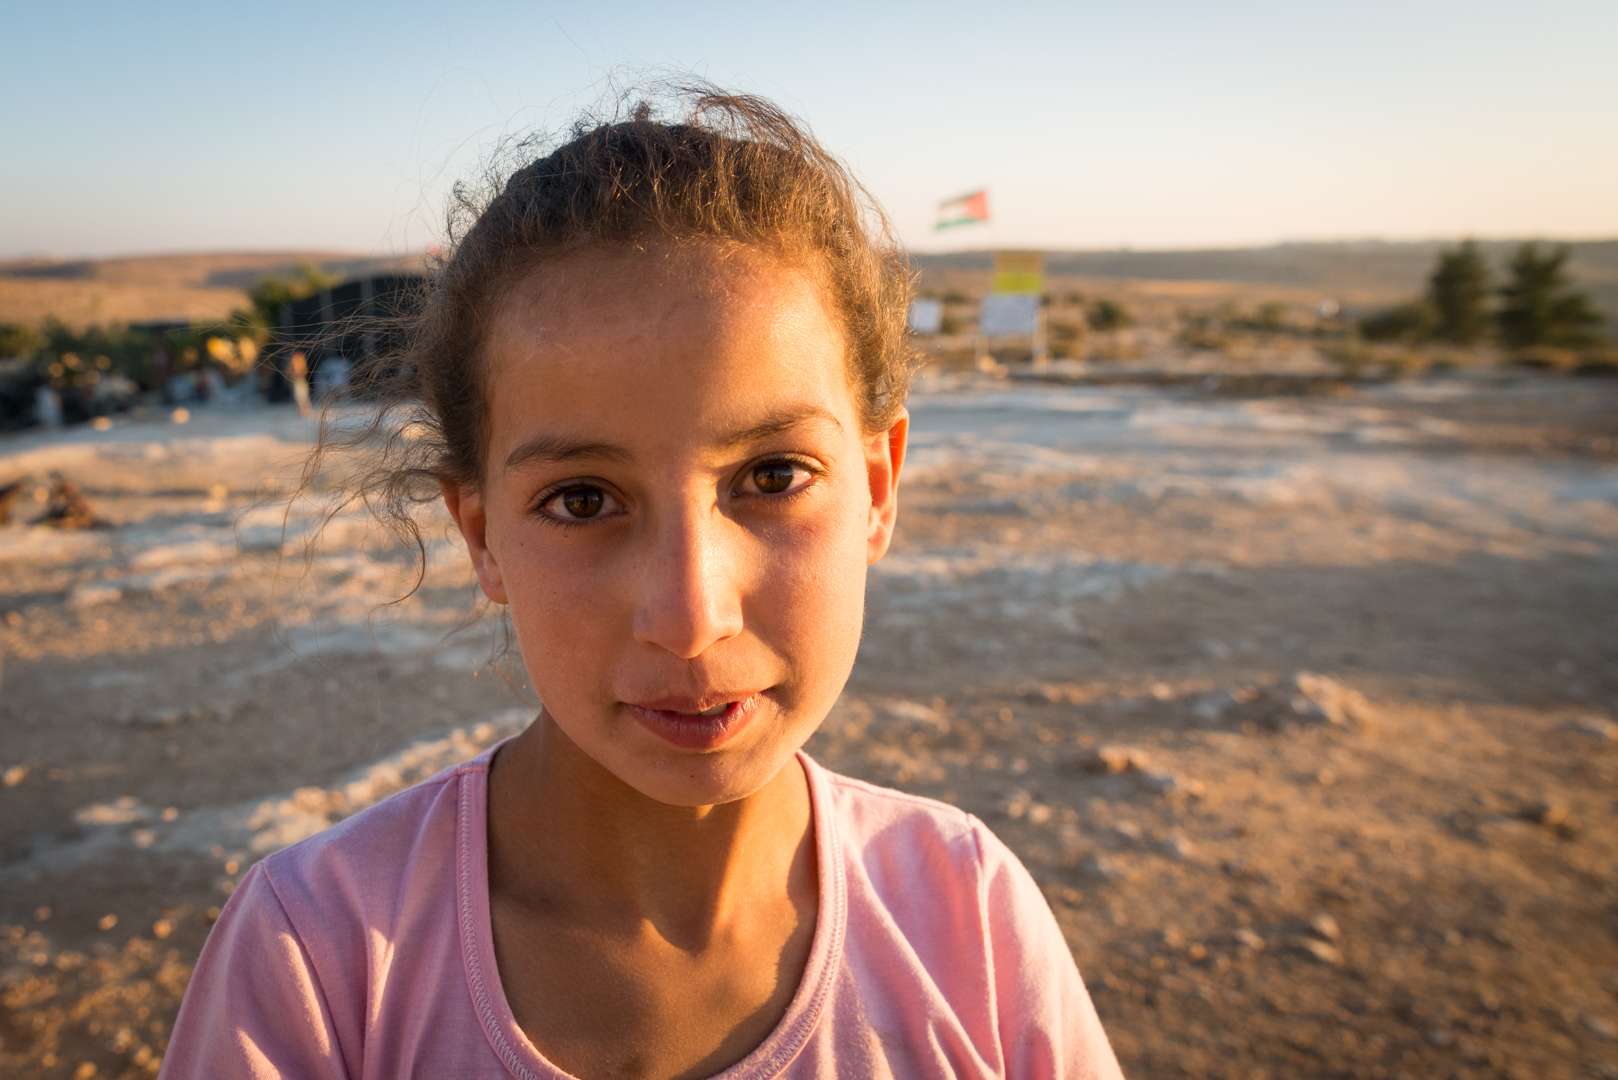 A Palestinian girl whose home in Susiya is scheduled to be demolished before the 3rd of August 2015, leaving her and her family homeless in harsh desert conditions.